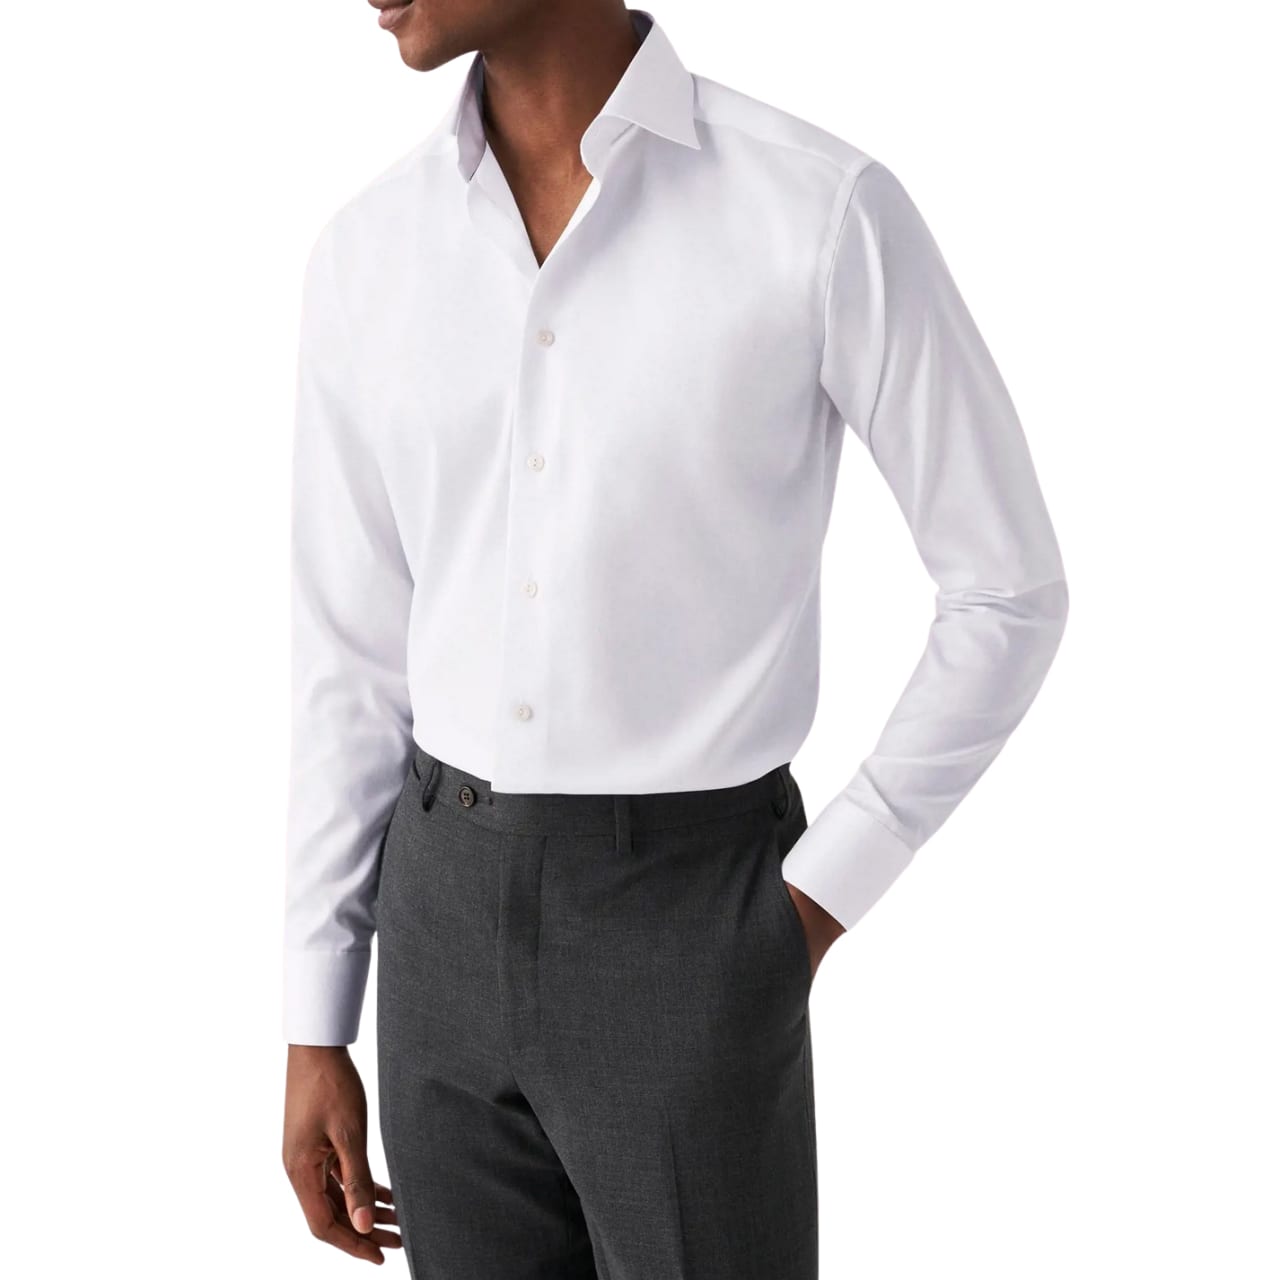 The Best White Shirts for Men and Women - Buy Side from WSJ